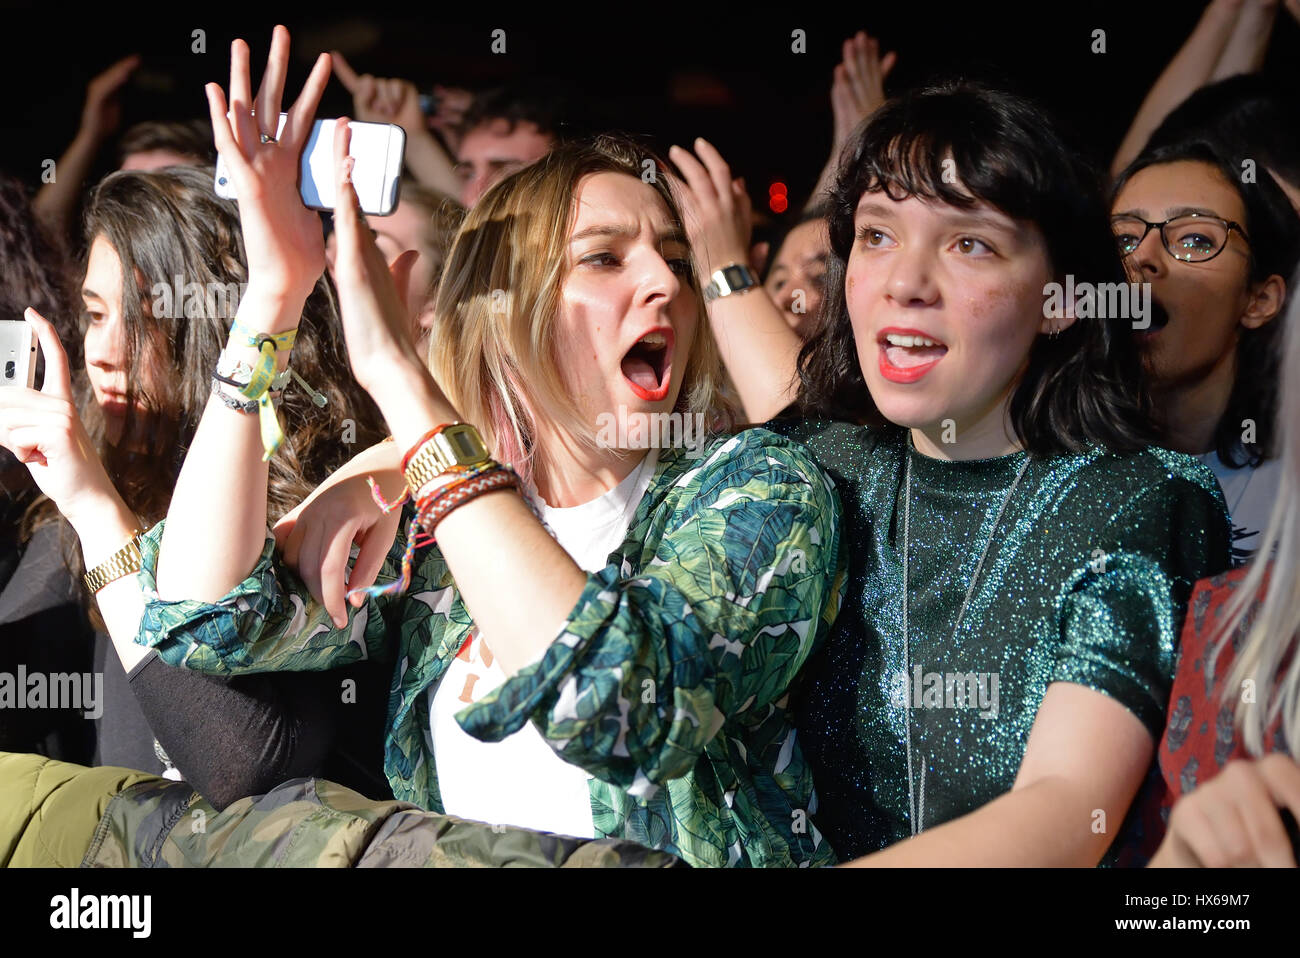 BARCELONA - FEB 6: The crowd cheering in a concert at Razzmatazz stage on February 6, 2016 in Barcelona, Spain. Stock Photo